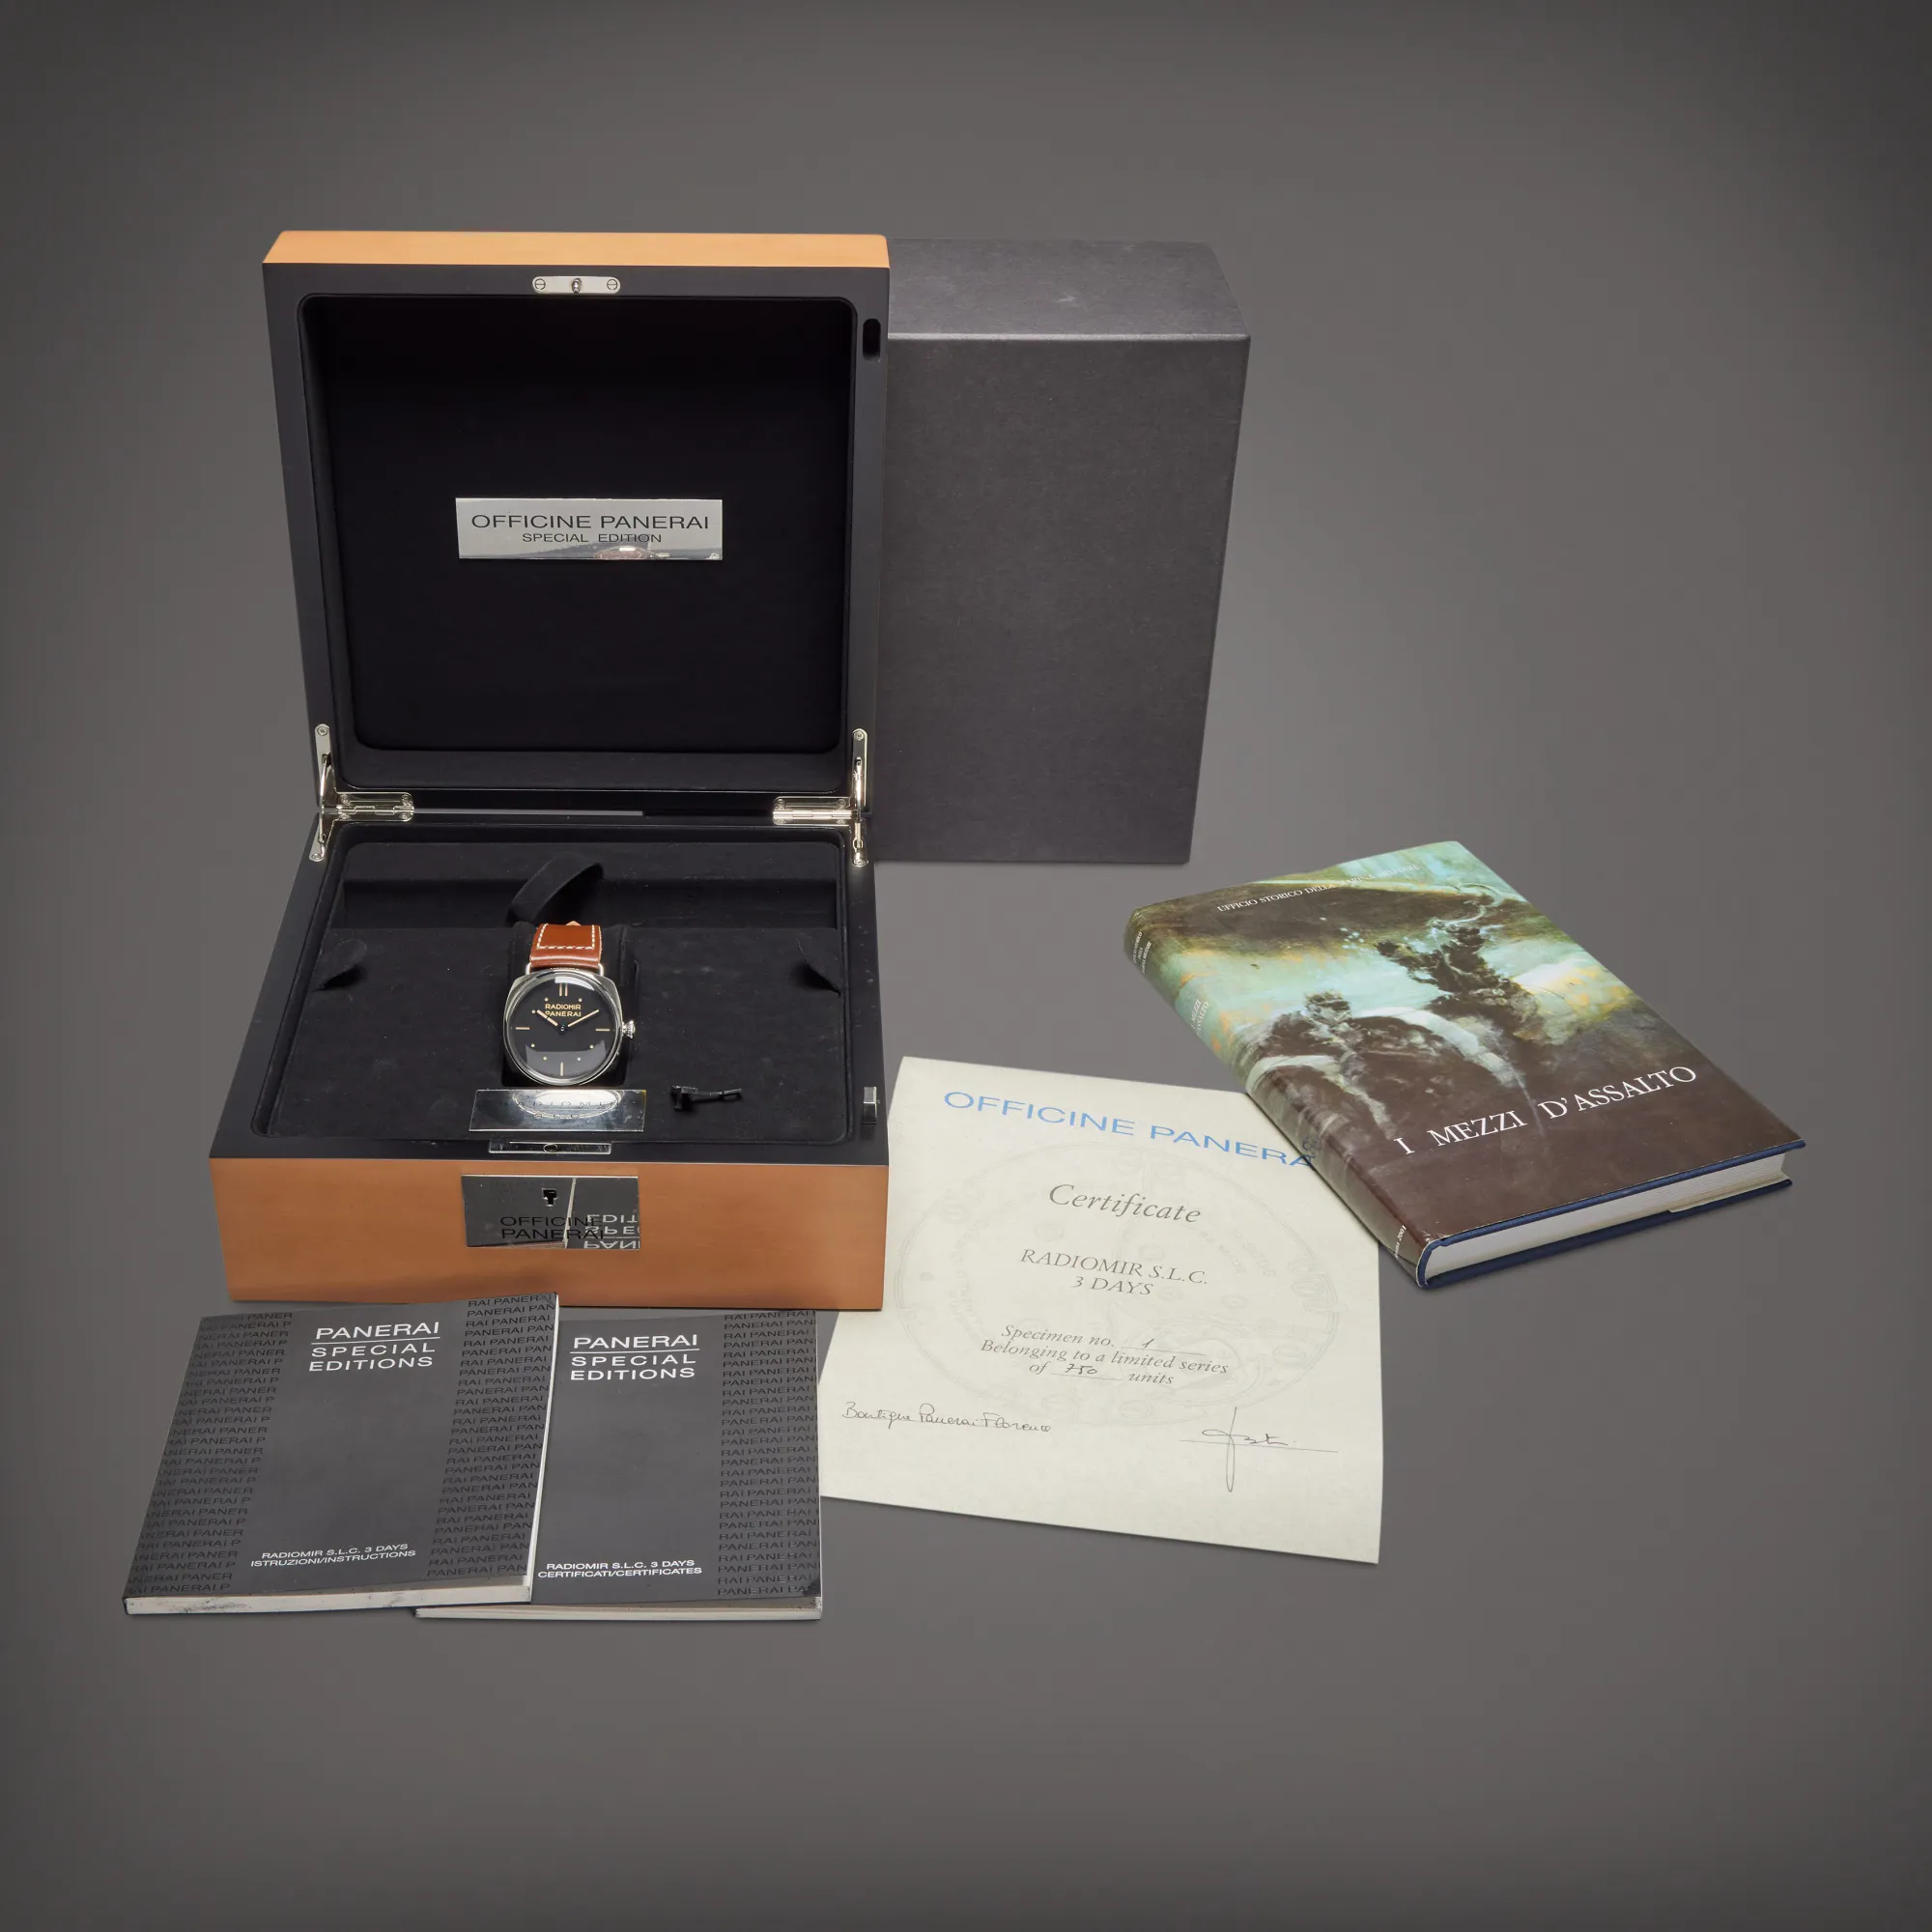 Panerai Special Editions PAM 00449 47mm Stainless steel Black 5